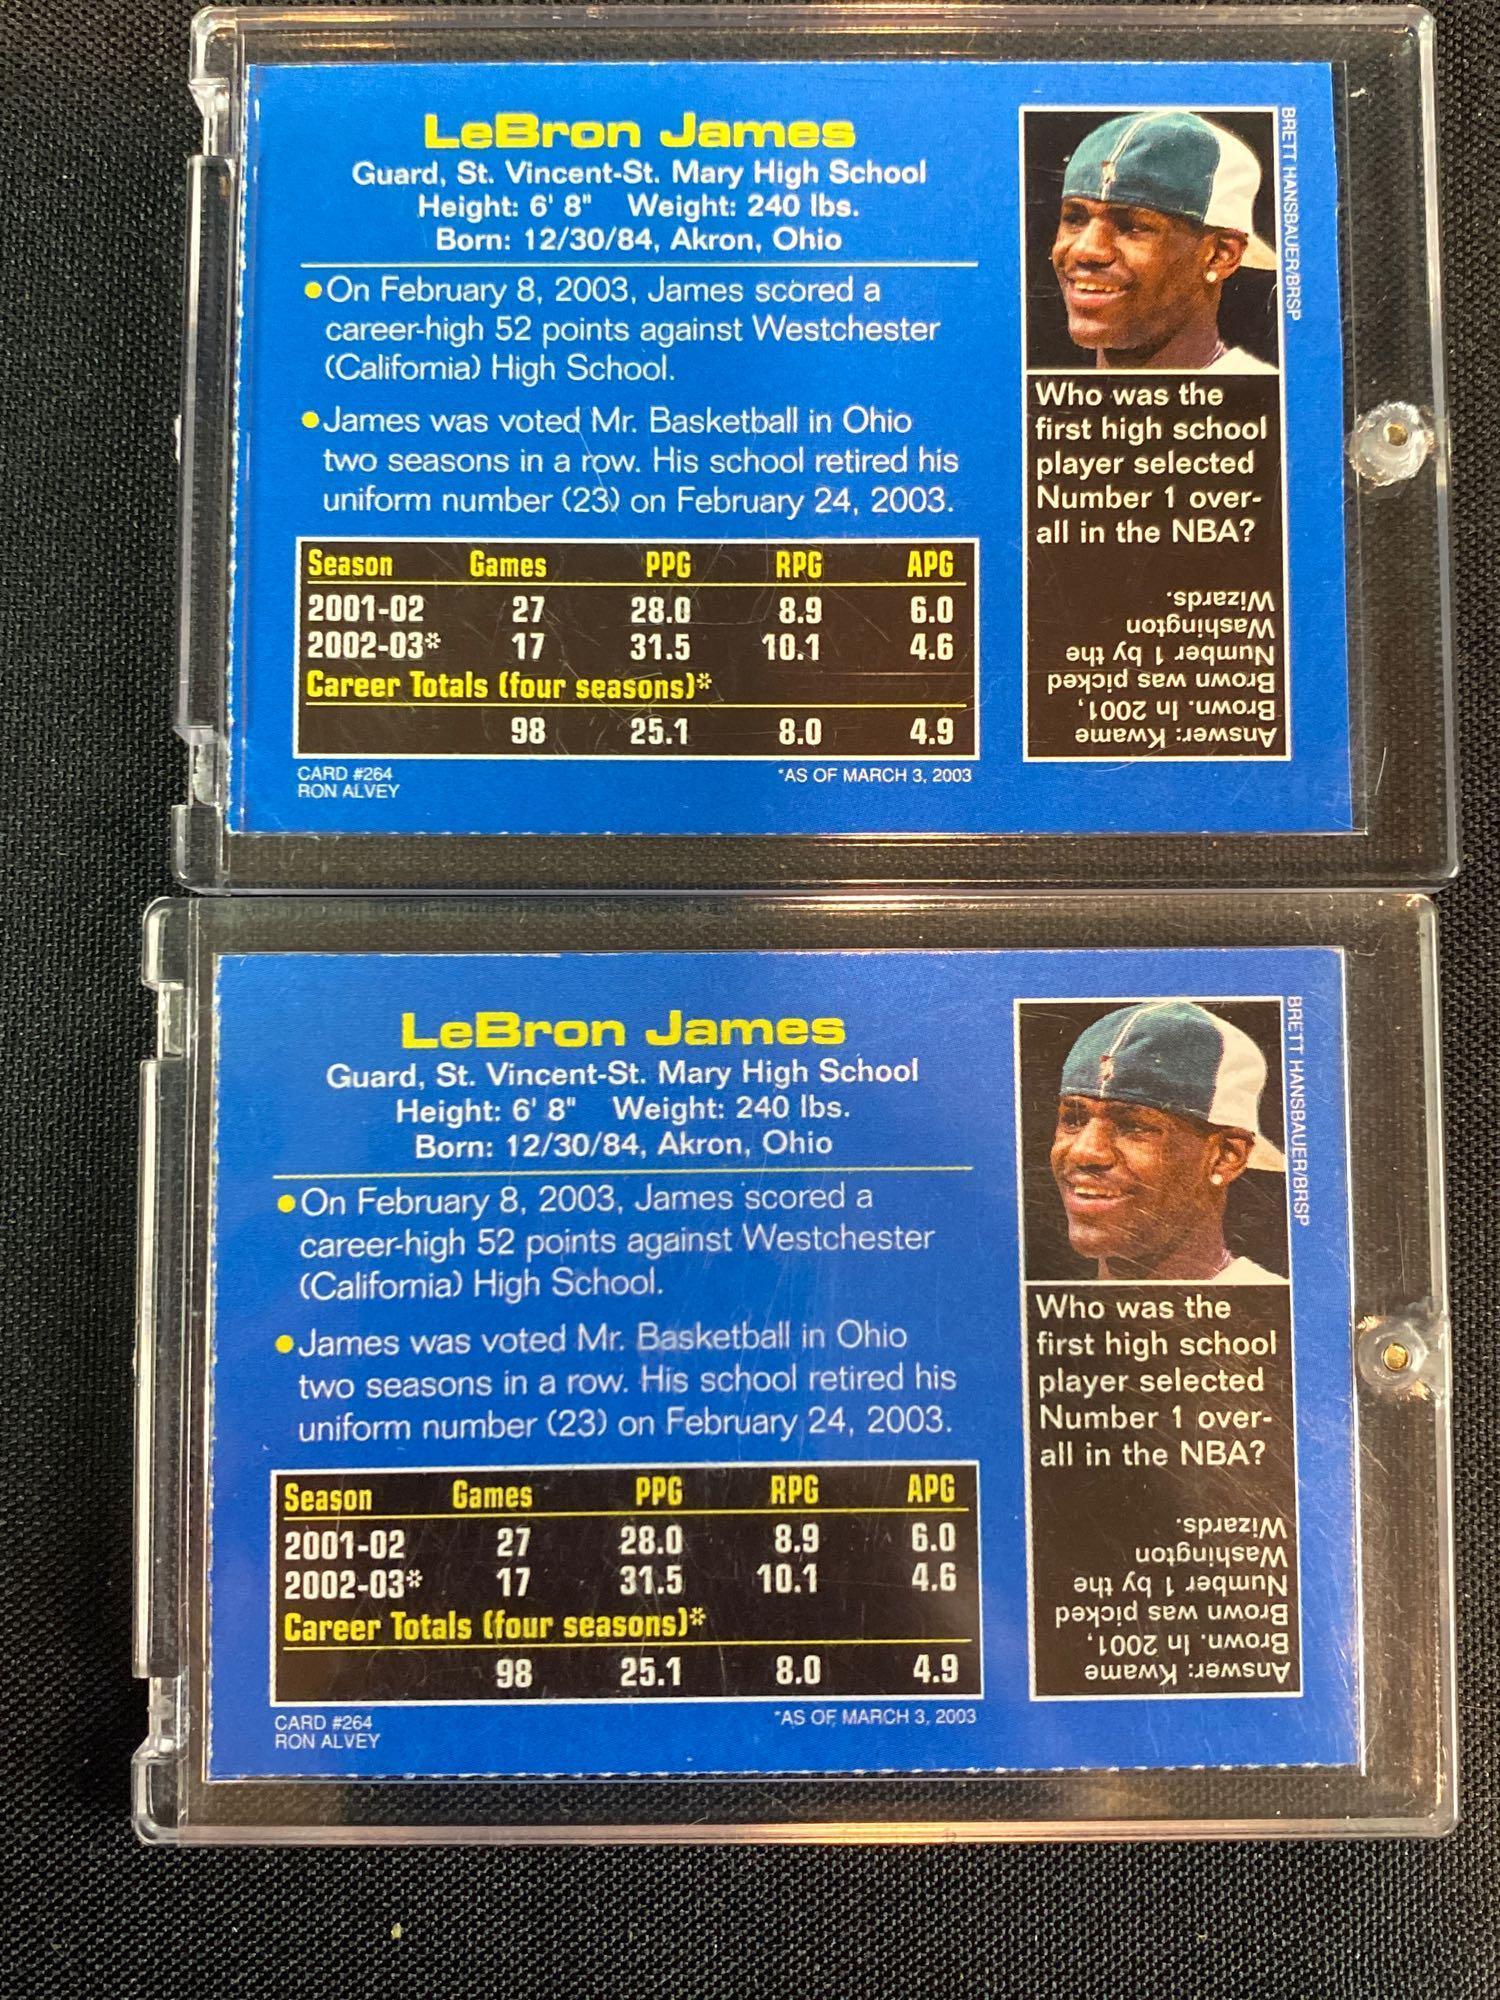 LeBron James 2003 Sports Illustrated for kids cards, Upper Deck, dual game materials card.